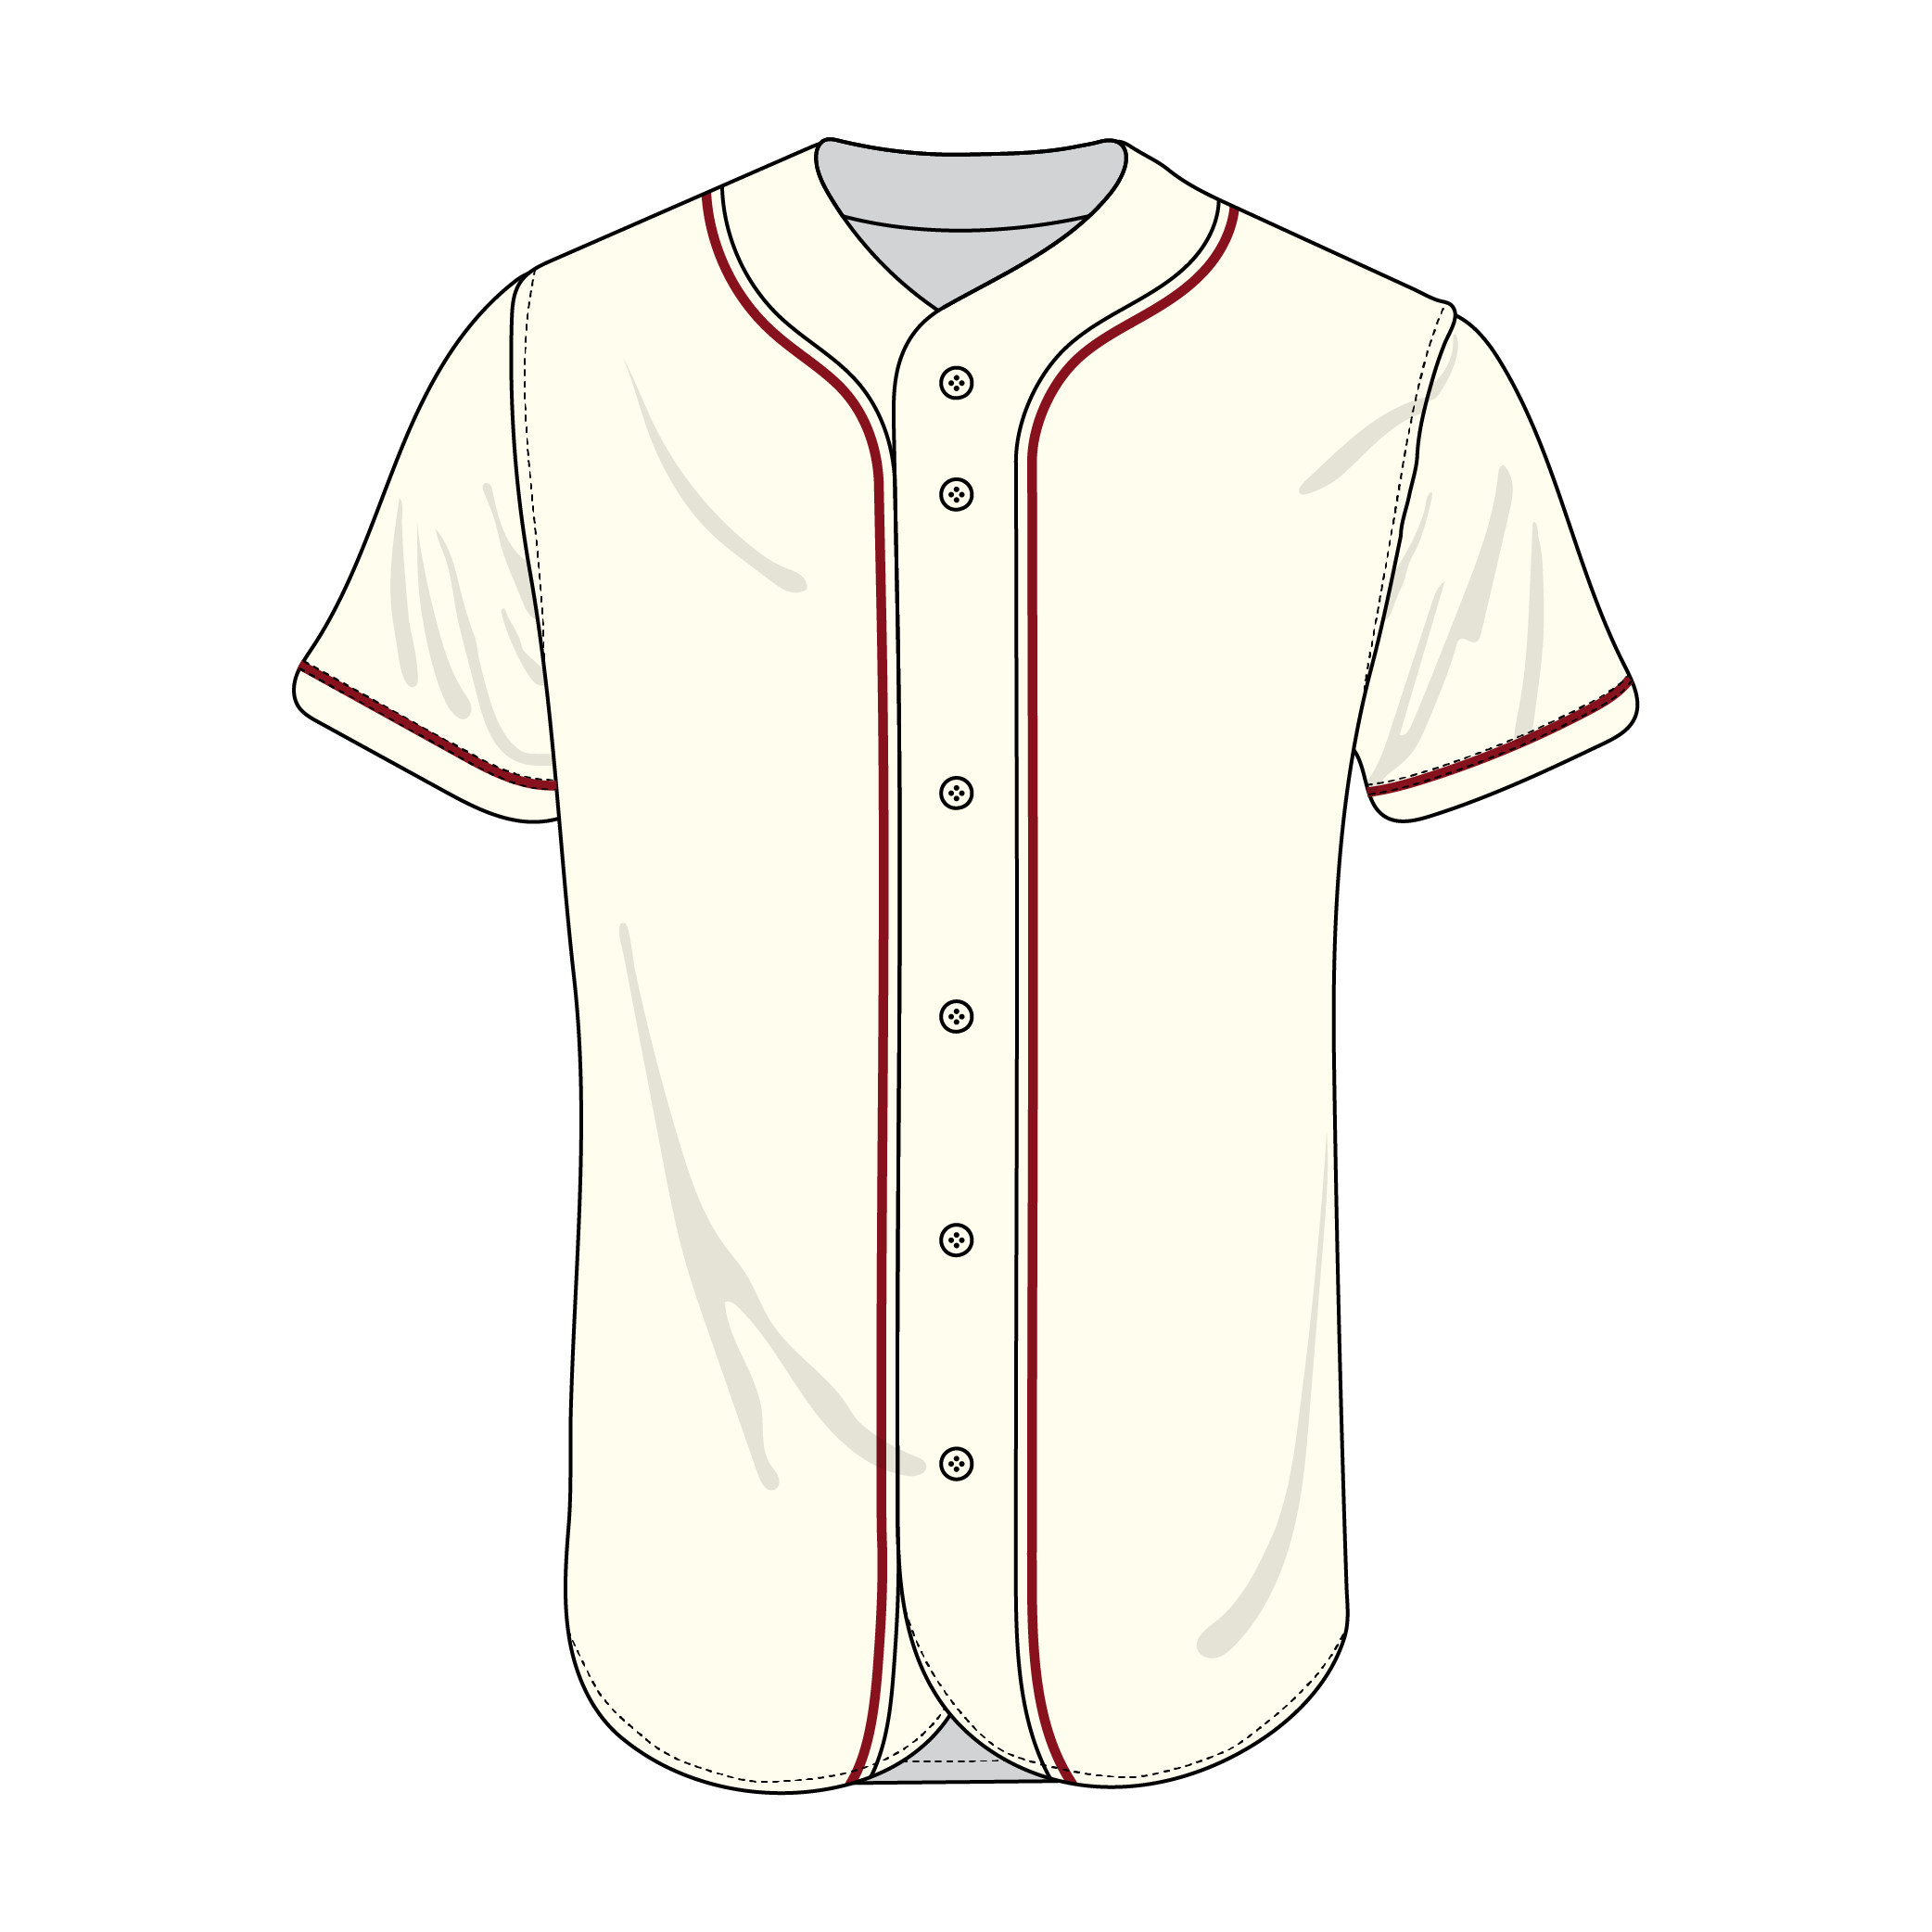 Clubhouse Original: Piped Vintage Baseball Jersey